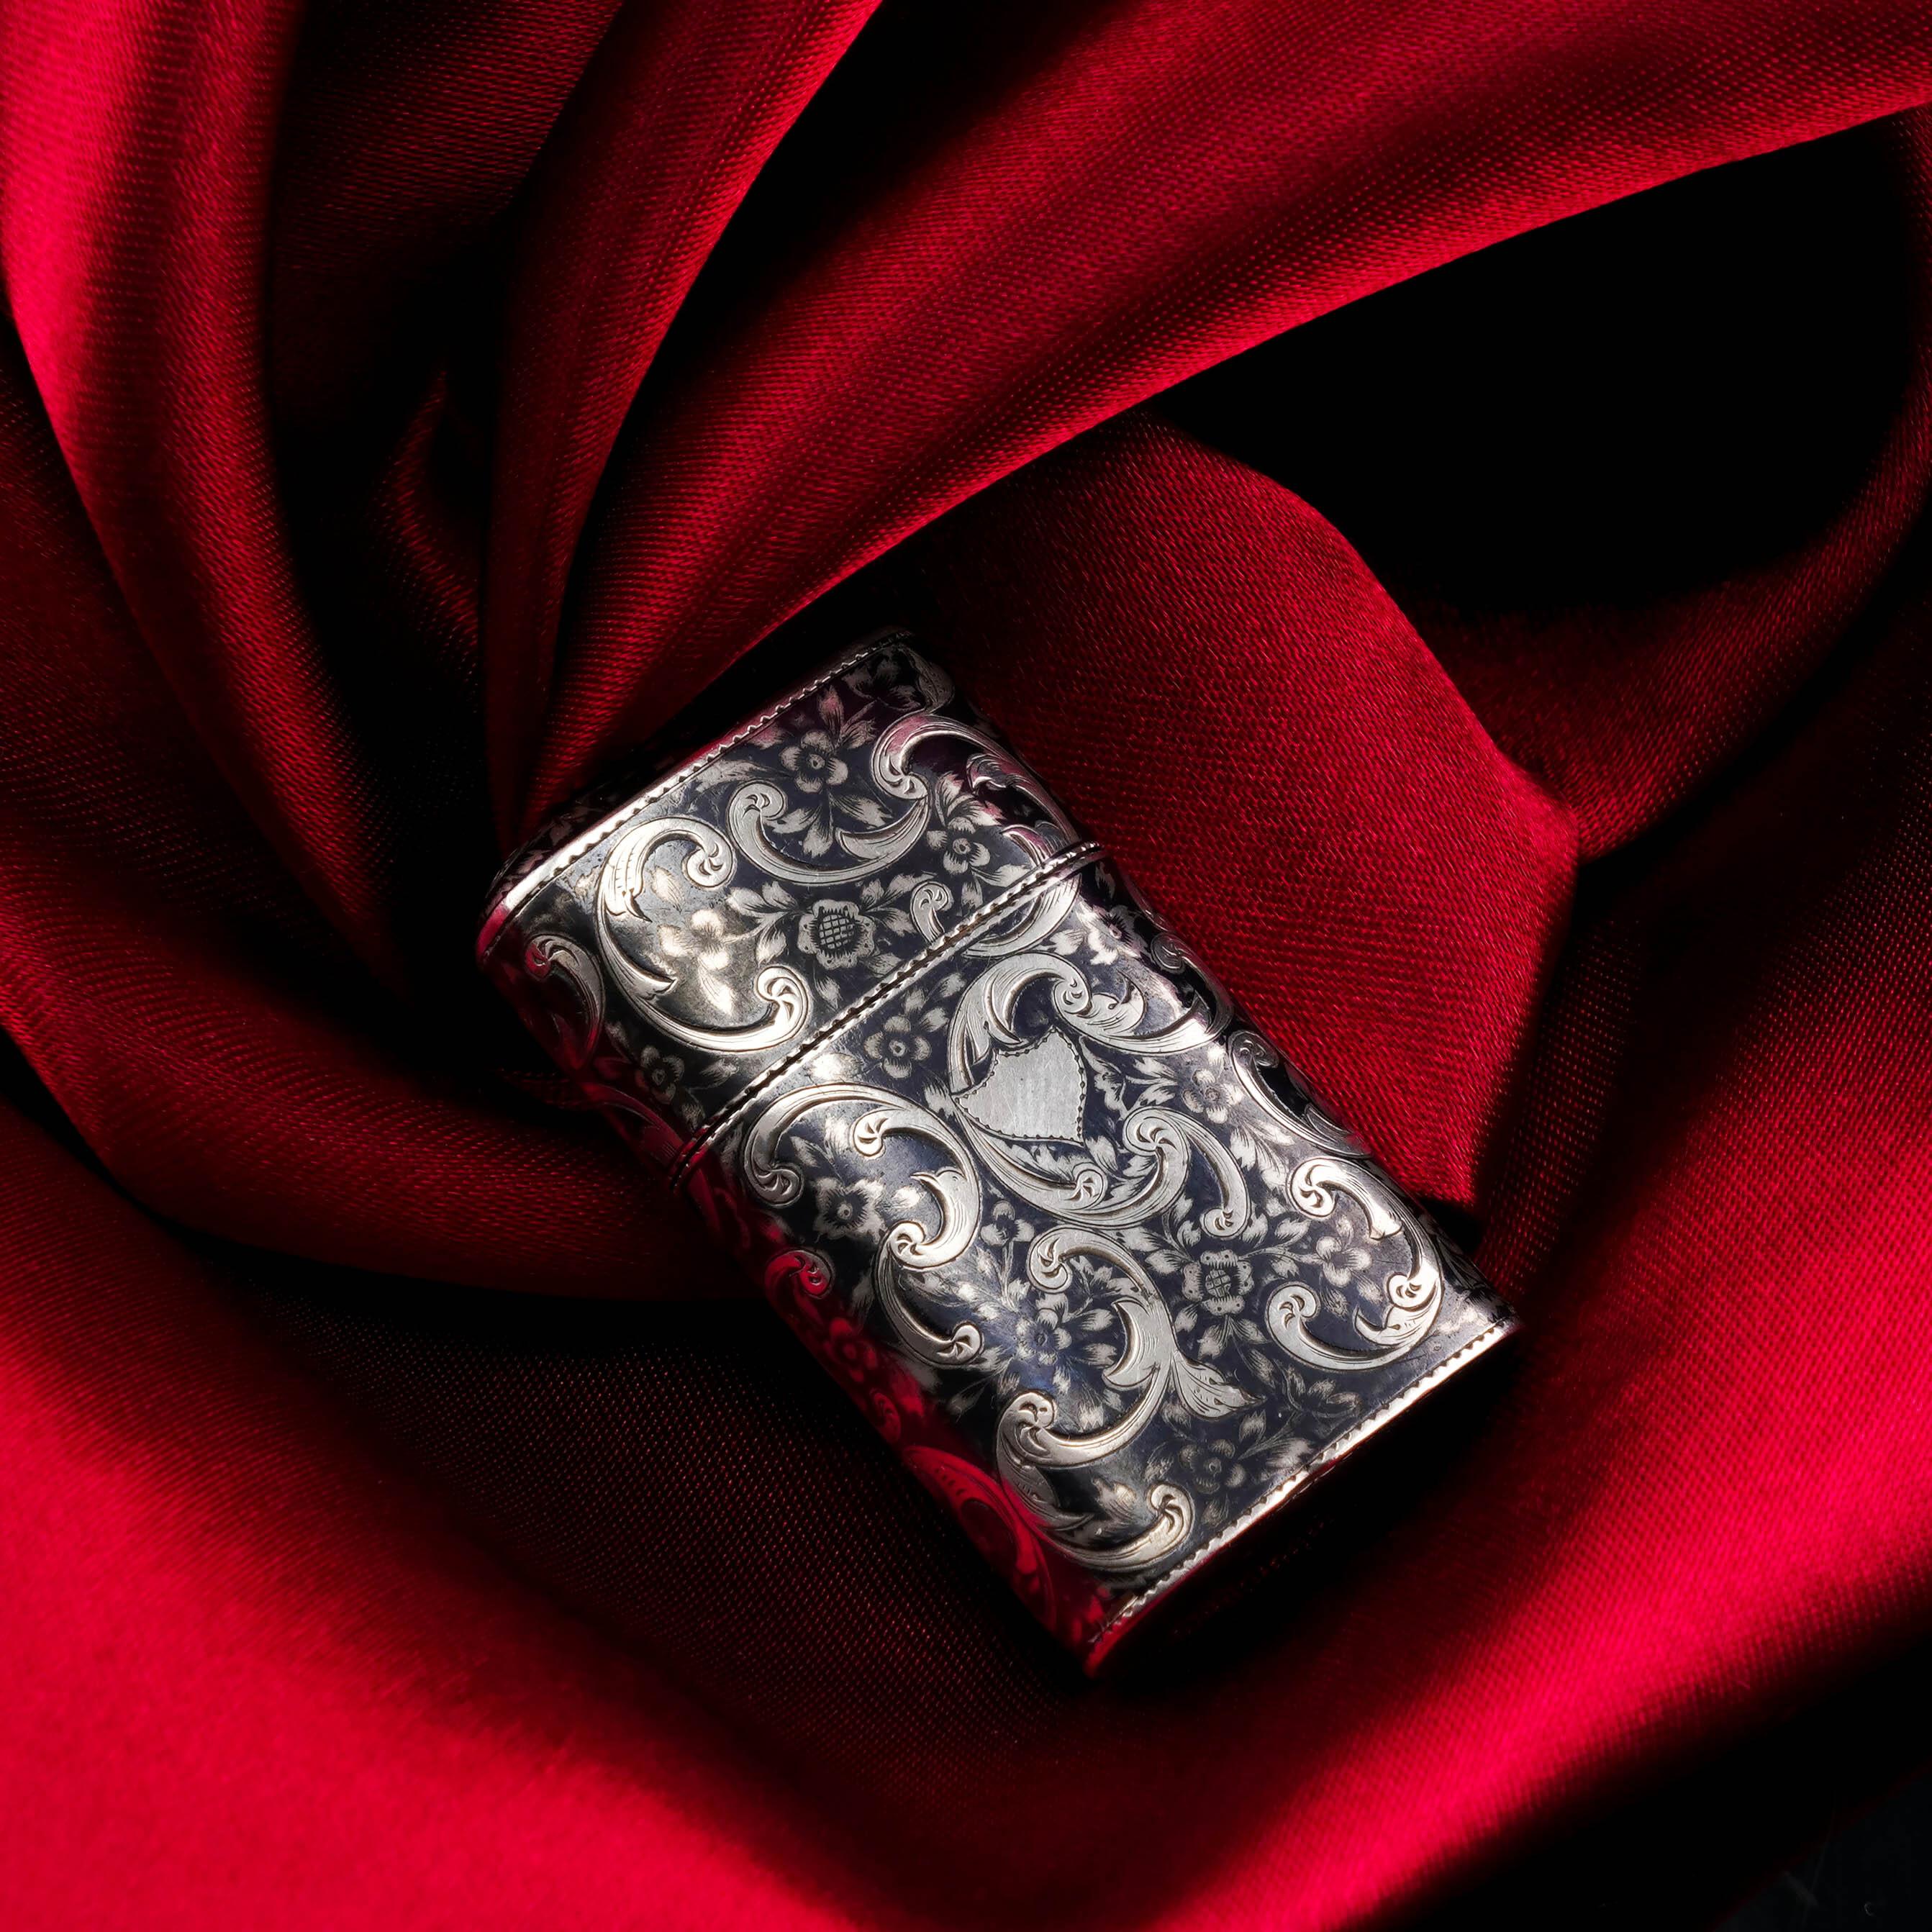 We are delighted to offer this intricate and distinguished antique Imperial Russian vesta case. 
 
The case is beautifully decorated with contrasting hand-engraved silver and niello with the entire exterior featuring floral and foliate scrolls and